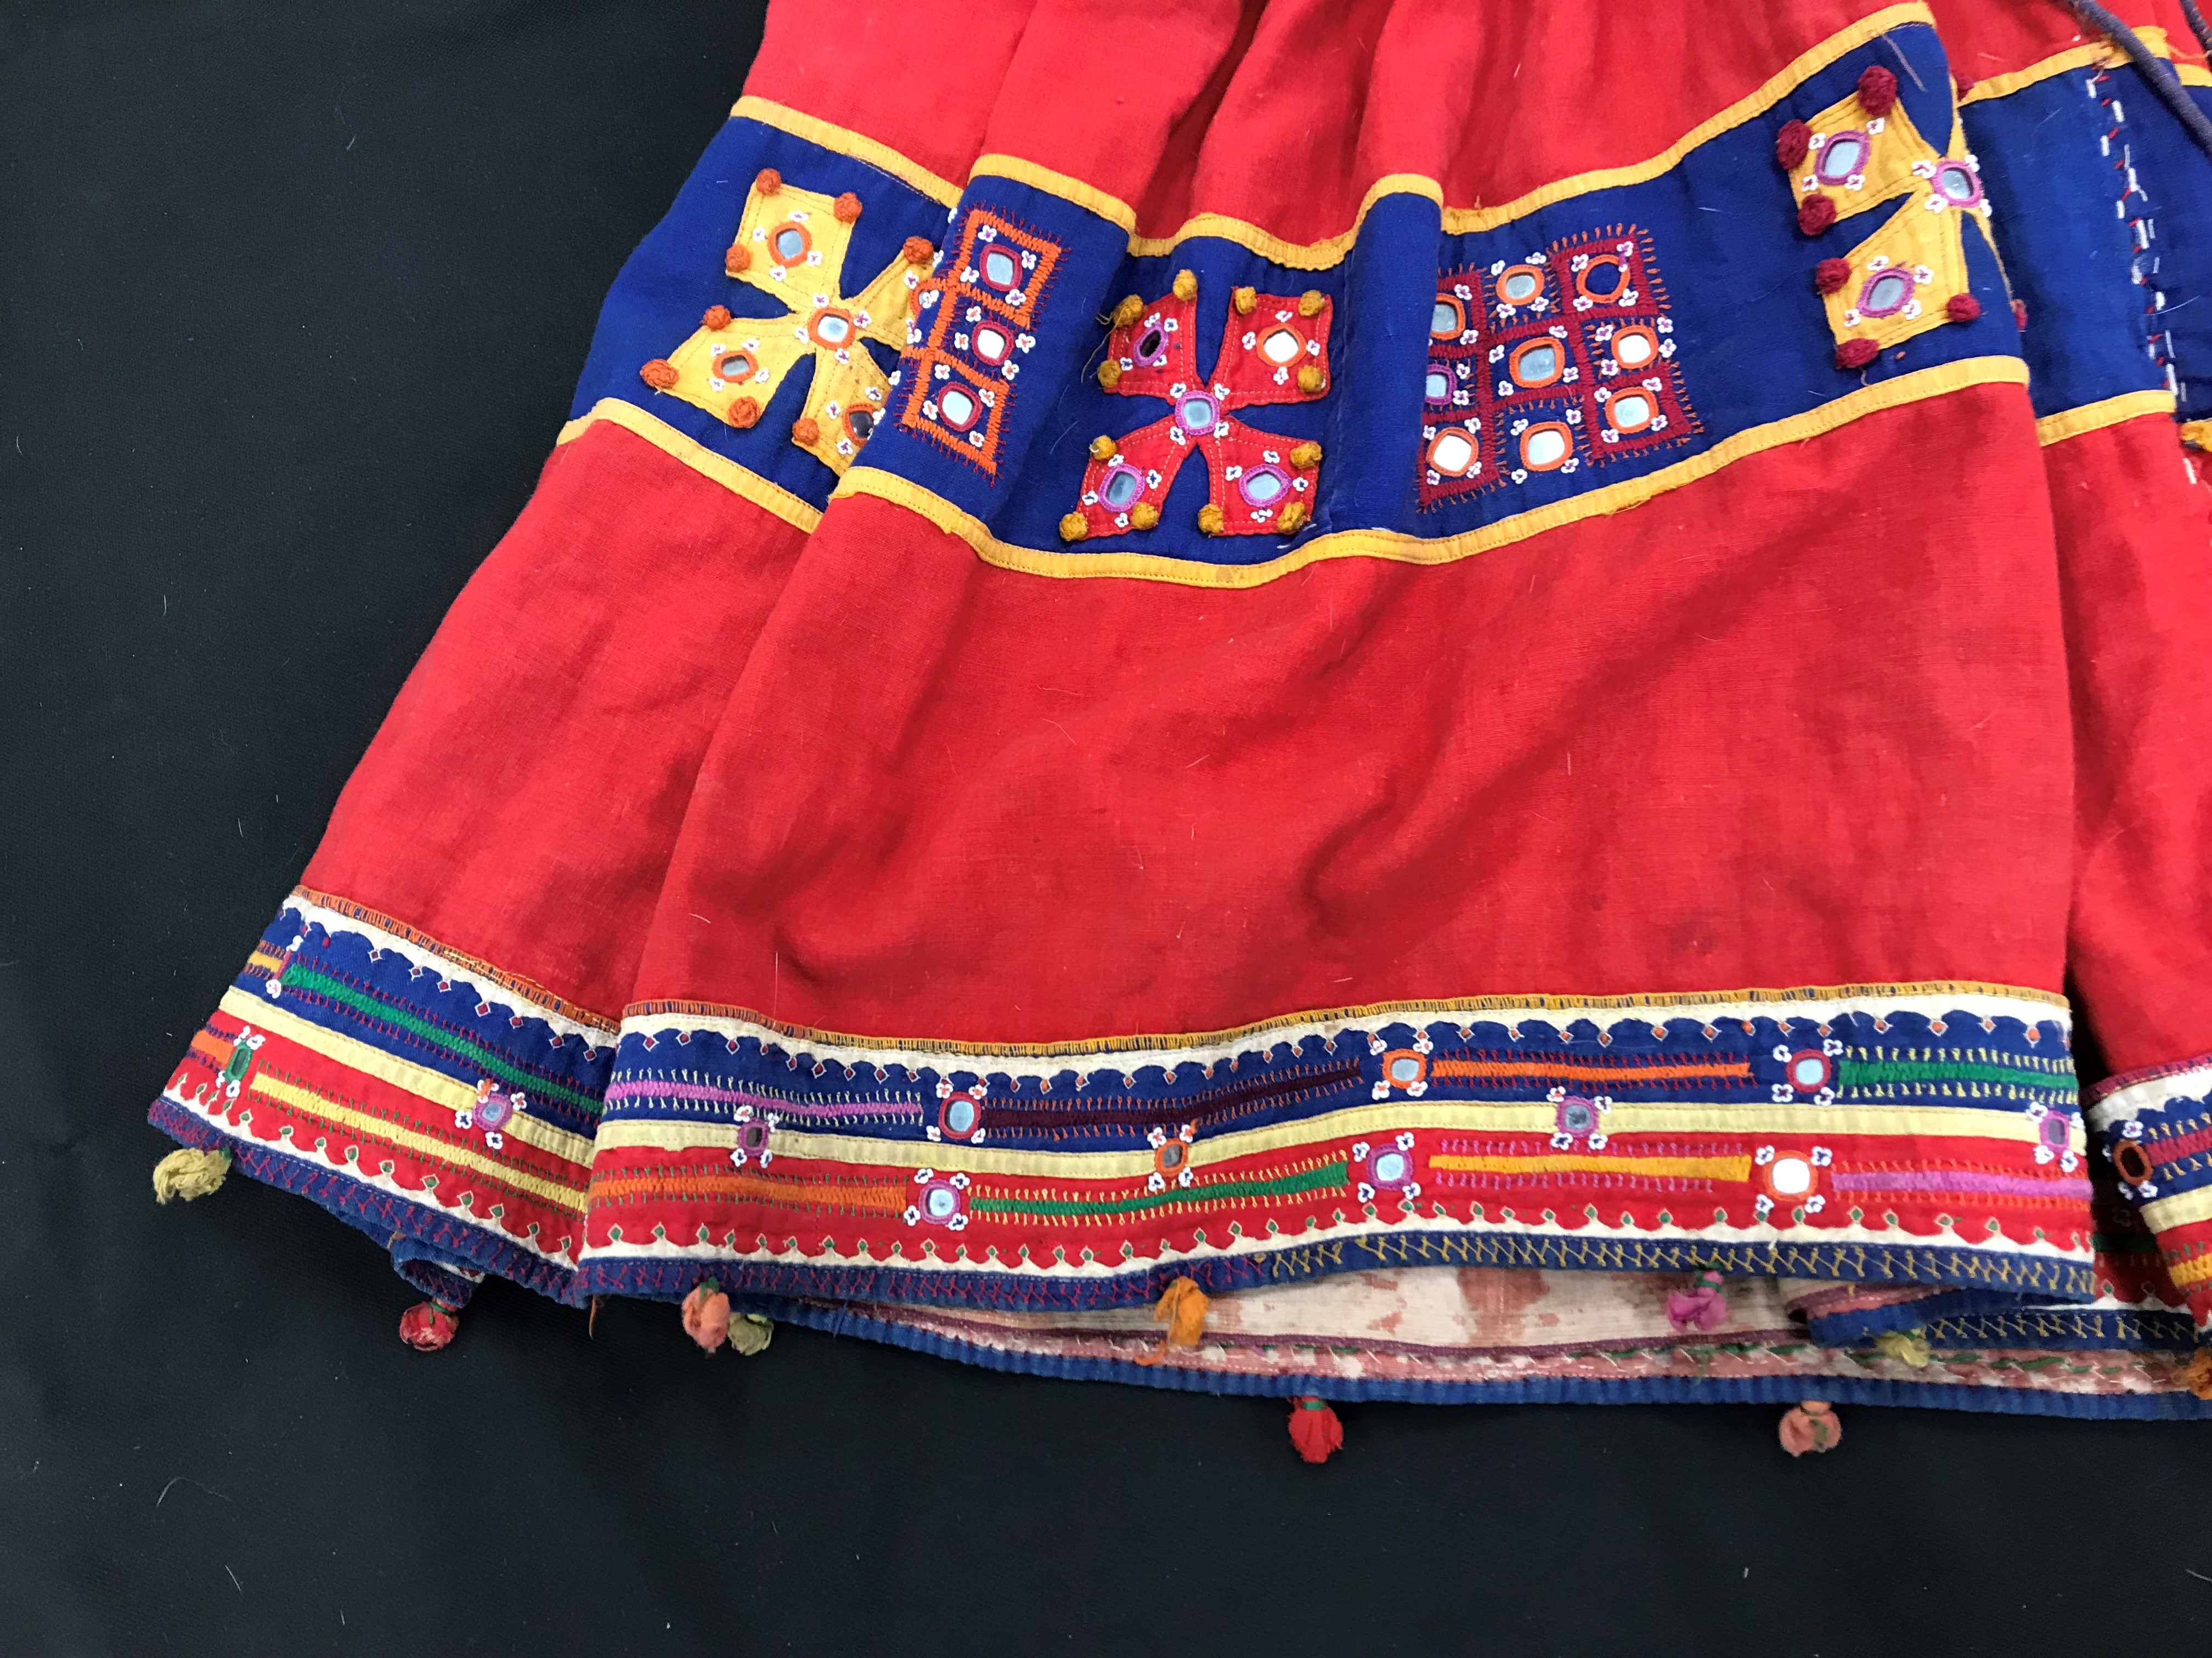 A Rajhistani skirt in red and blue stripes with overlaid embroidery and mirrored decorations, - Image 10 of 14